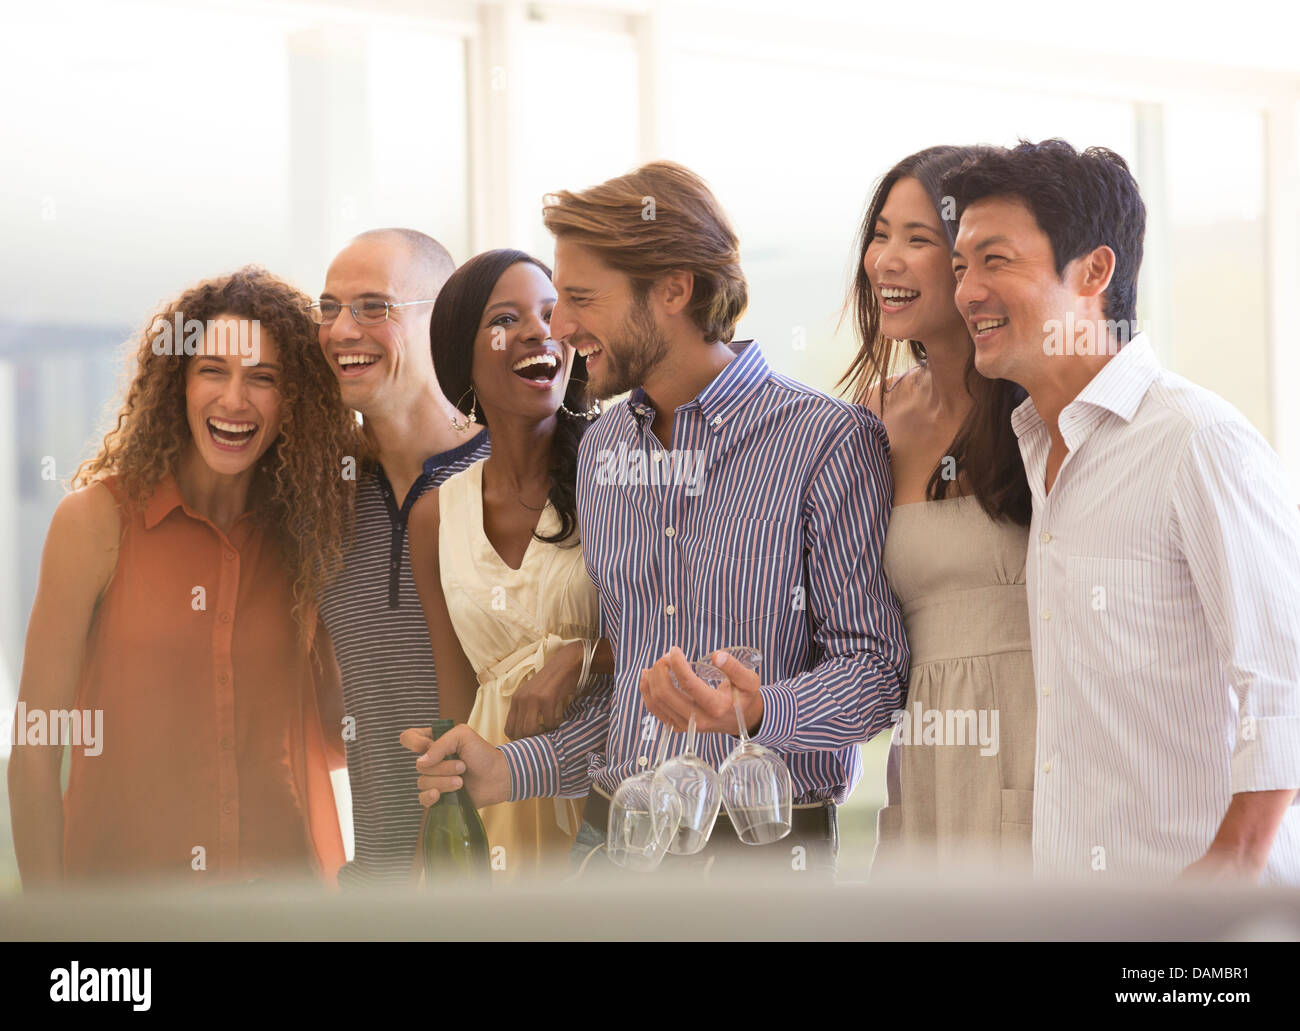 Friends Laughing Together At Party Stock Photo Alamy